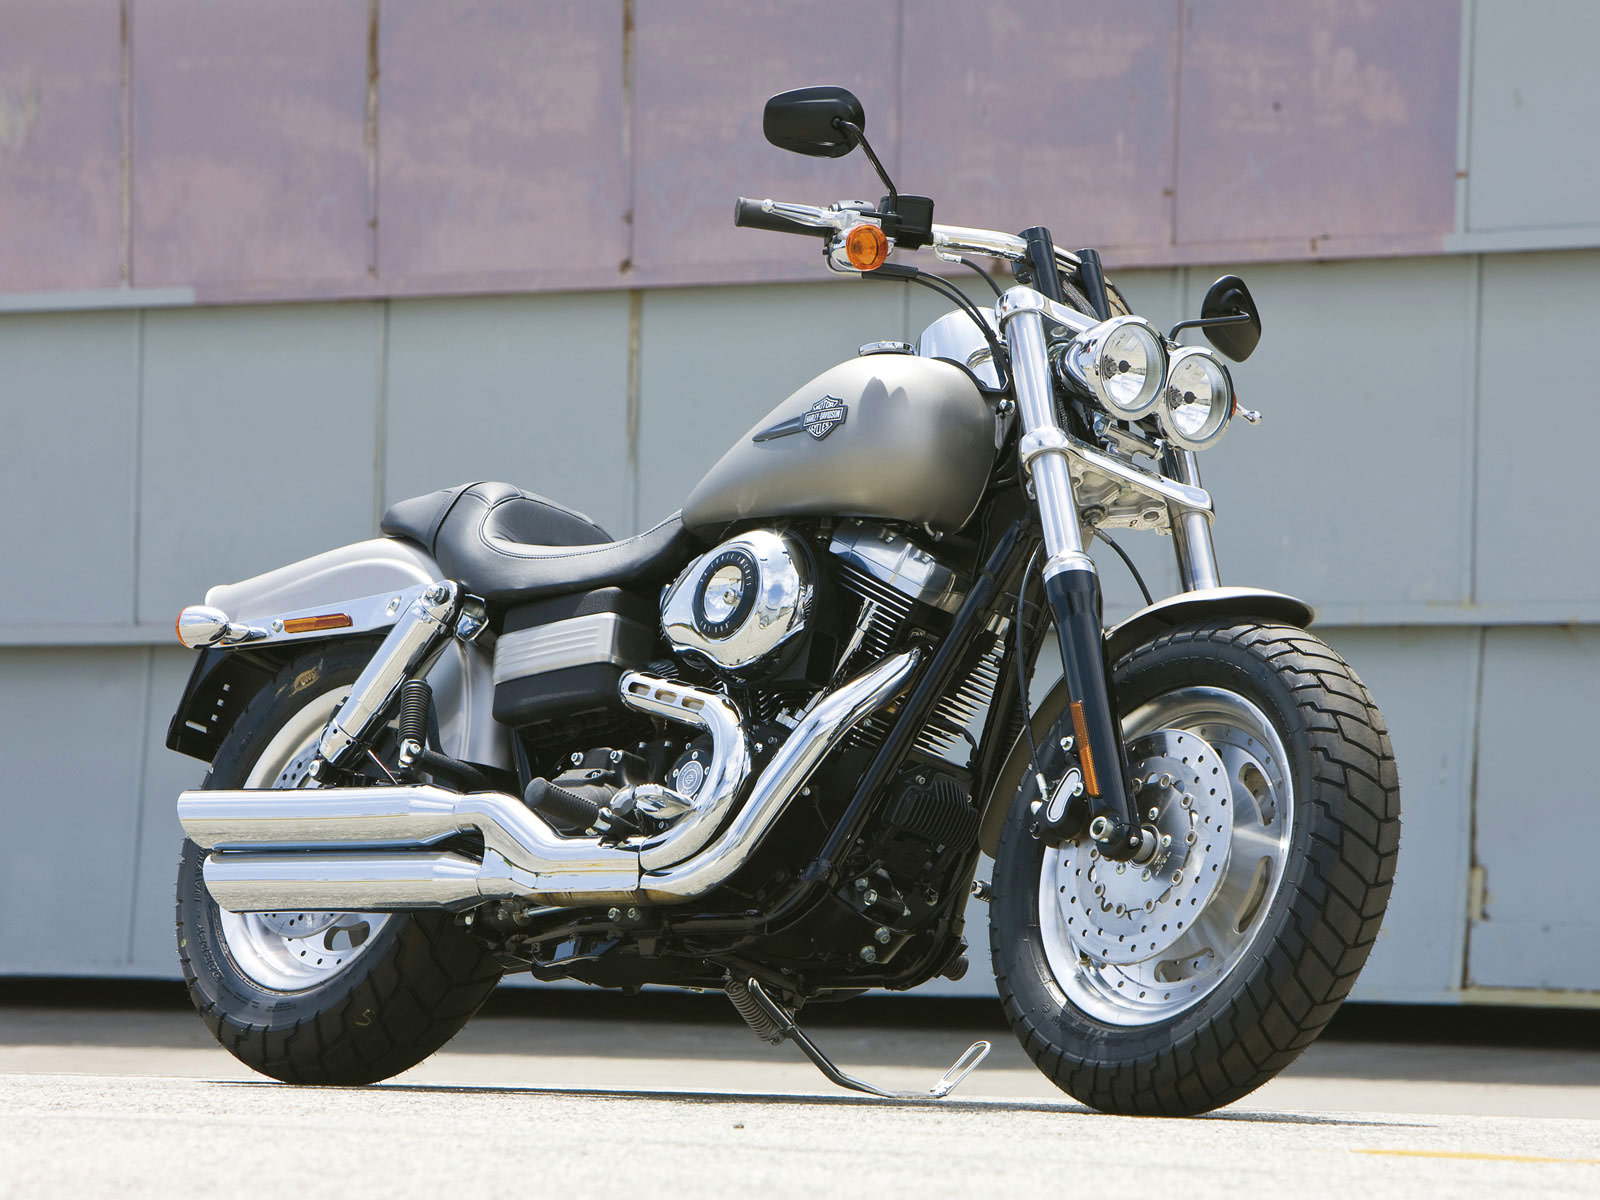 Harley Davidson Fxdf Dyna Fat Bob Pictures Specifications